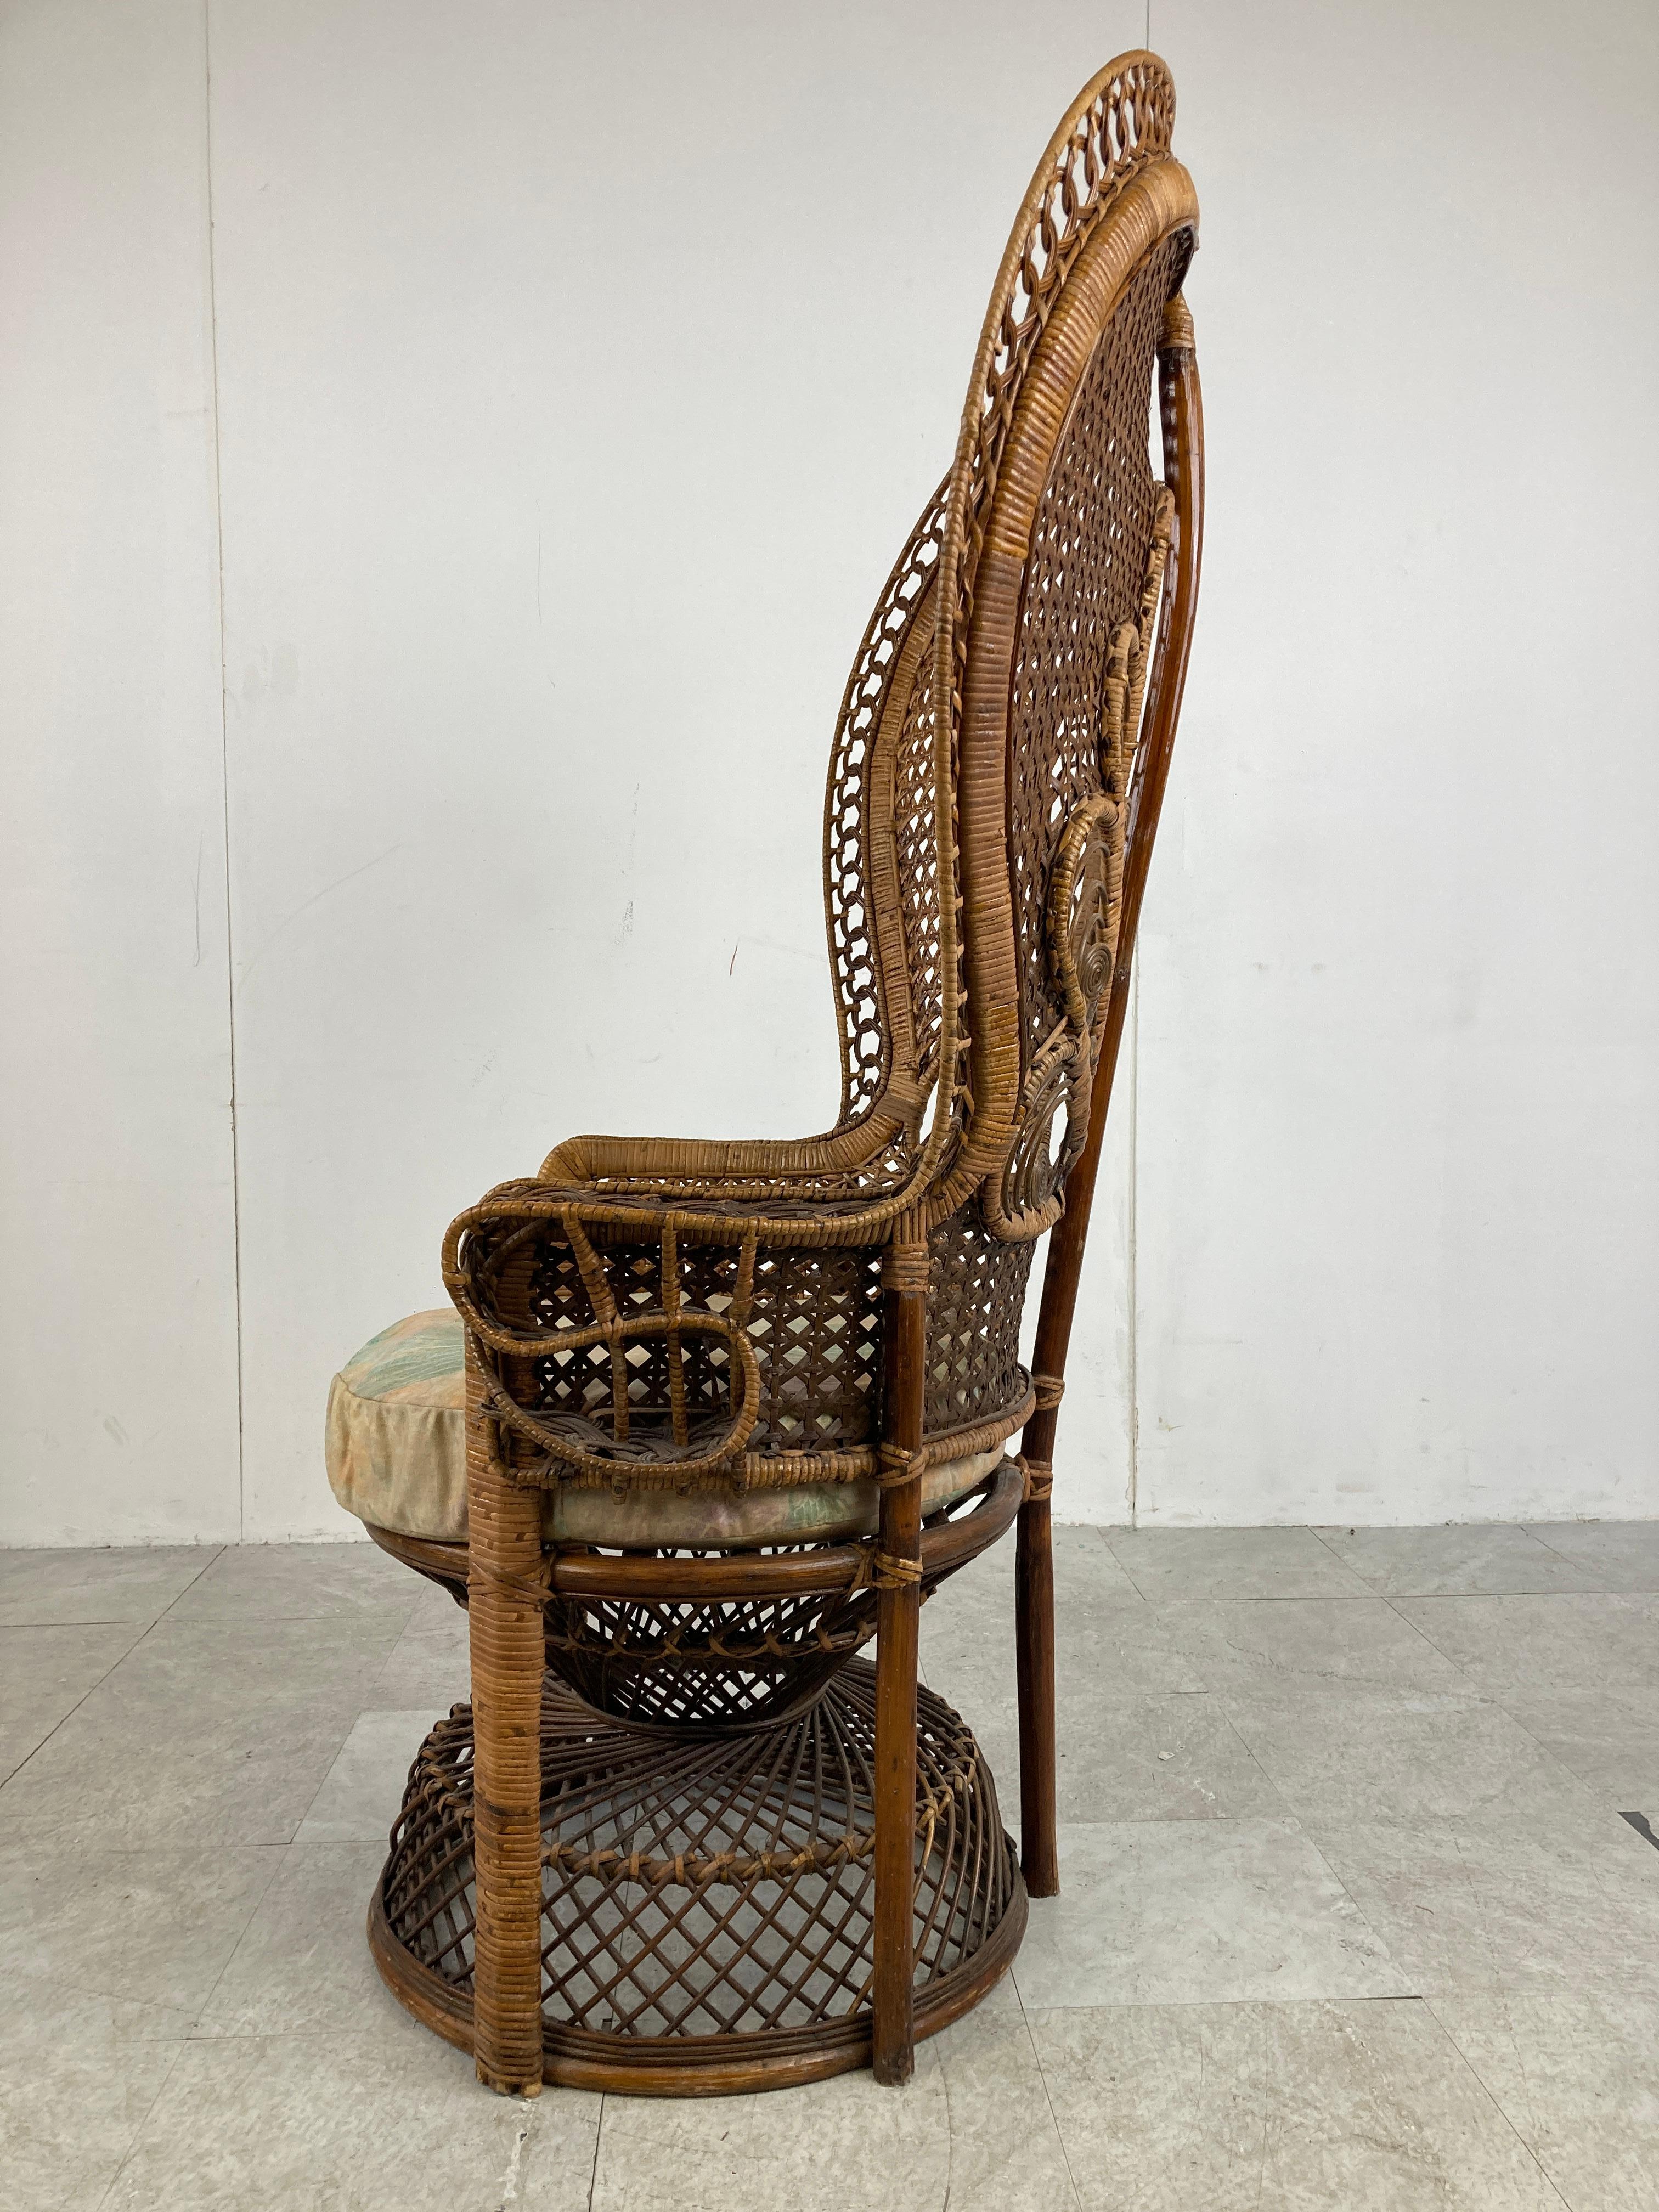 Elegant vintage peacock 'emanuelle' style chair.

Timeless and decorative pieces in the bohemian style.

Can be used both in-and outside.

Good condition with normal age related wear

1970s - Asia

Measures: height: 140cm/55.11